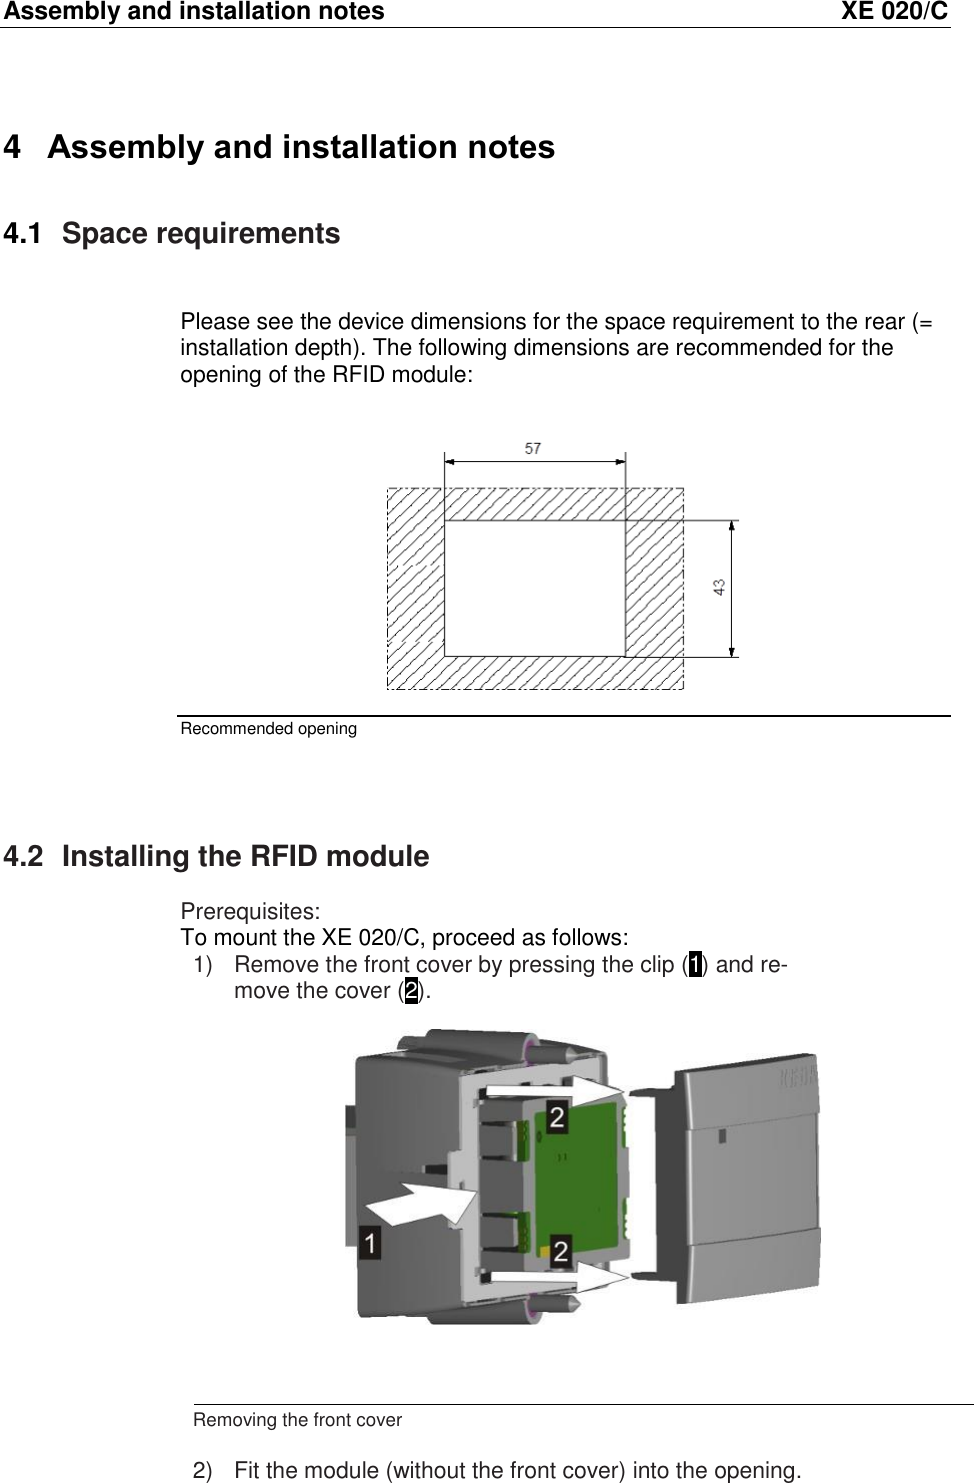 Assembly and installation notes  XE 020/C 4  Assembly and installation notes 4.1  Space requirements  Please see the device dimensions for the space requirement to the rear (= installation depth). The following dimensions are recommended for the opening of the RFID module:    Recommended opening  4.2  Installing the RFID module Prerequisites: To mount the XE 020/C, proceed as follows: 1)  Remove the front cover by pressing the clip (1) and re-move the cover (2).       Removing the front cover  2)  Fit the module (without the front cover) into the opening. 